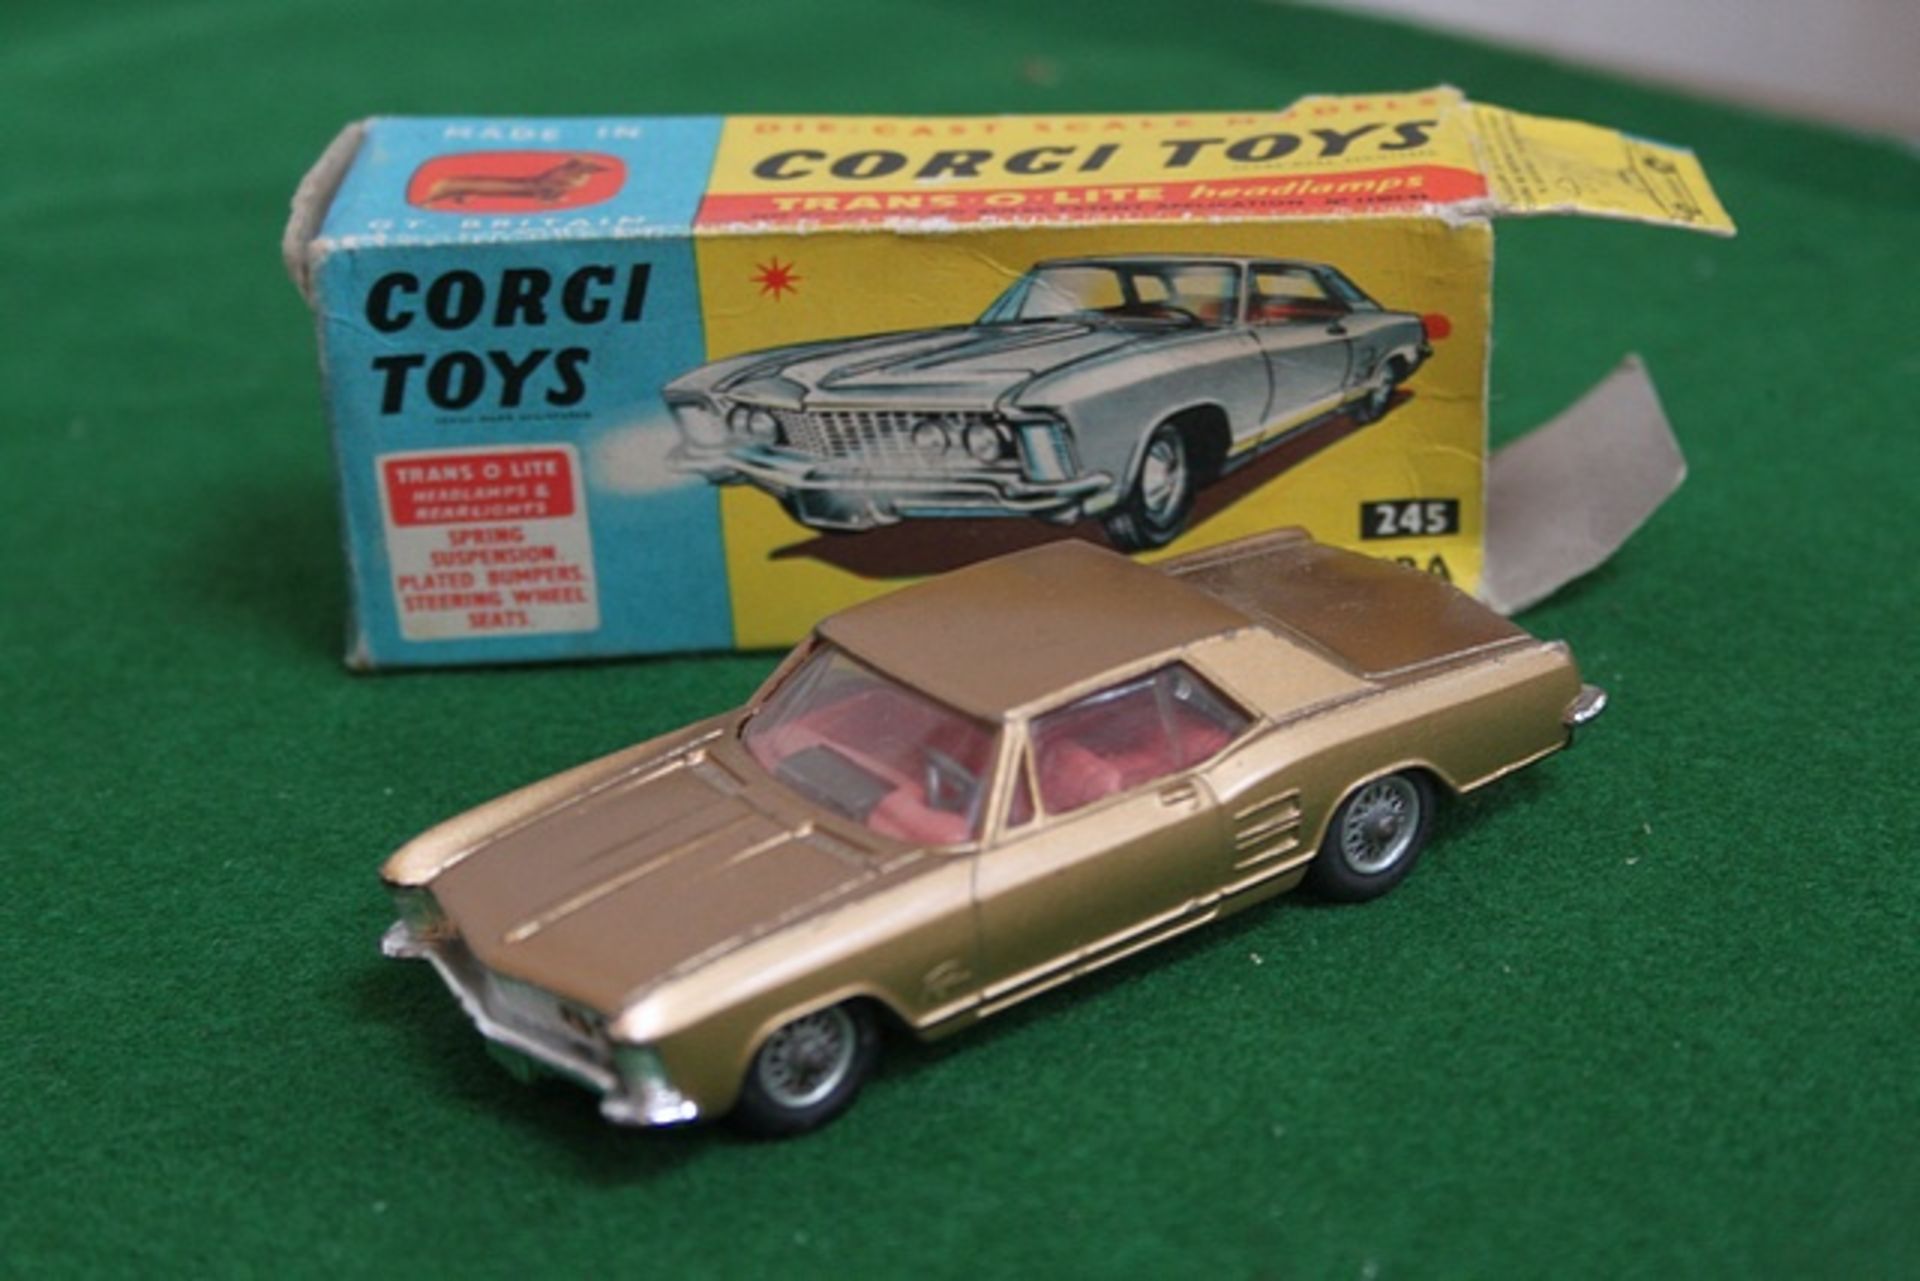 Corgi Toys # 245 Diecast Buick Riviera In Bronze With Red Interior Complete With Box (Box Is